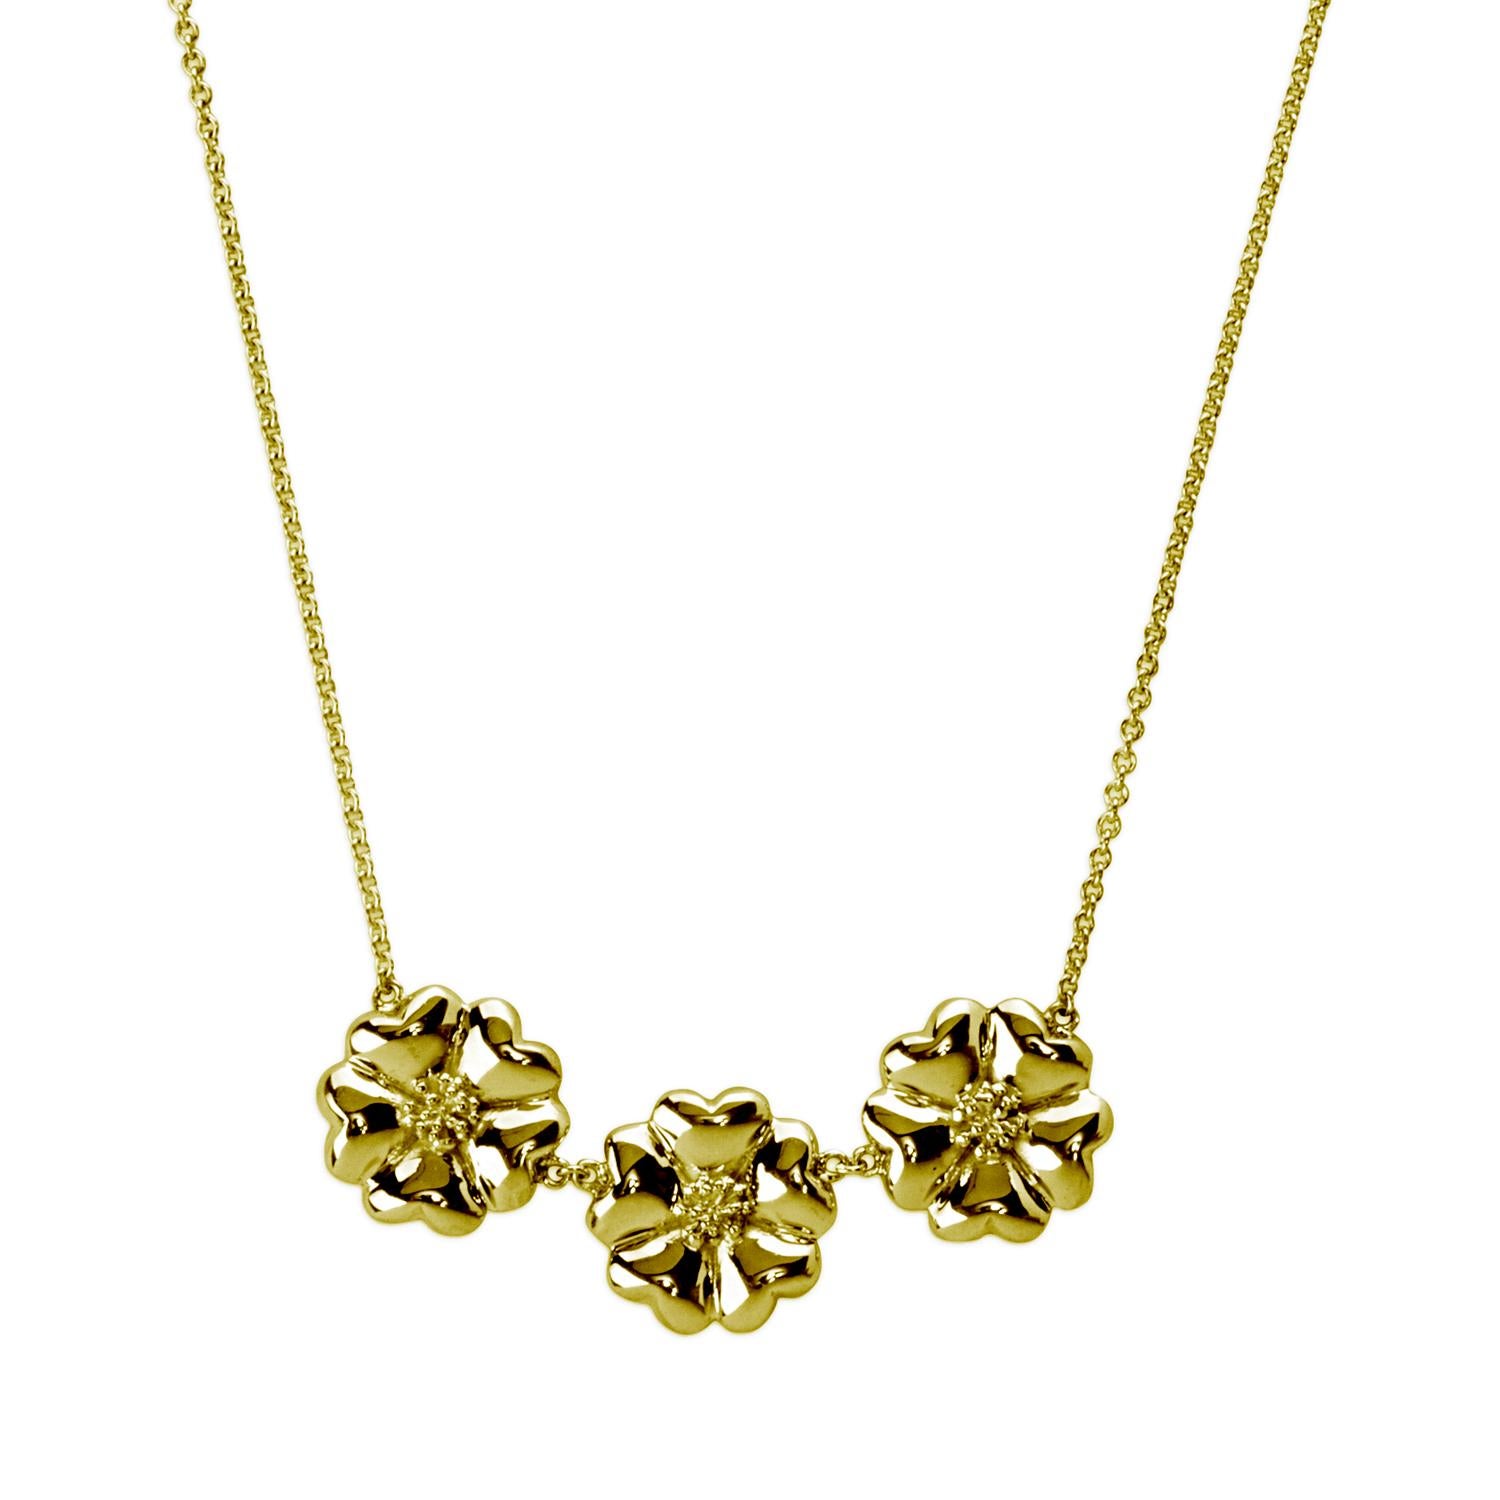 Designed in NYC

24k Rose Gold Vermeil 123 Large Blossom Necklace. No matter the season, allow natural beauty to surround you wherever you go. 123 large blossom necklace: 

	Sterling silver chain and blossoms in 24k rose gold vermeil 
	High-polish